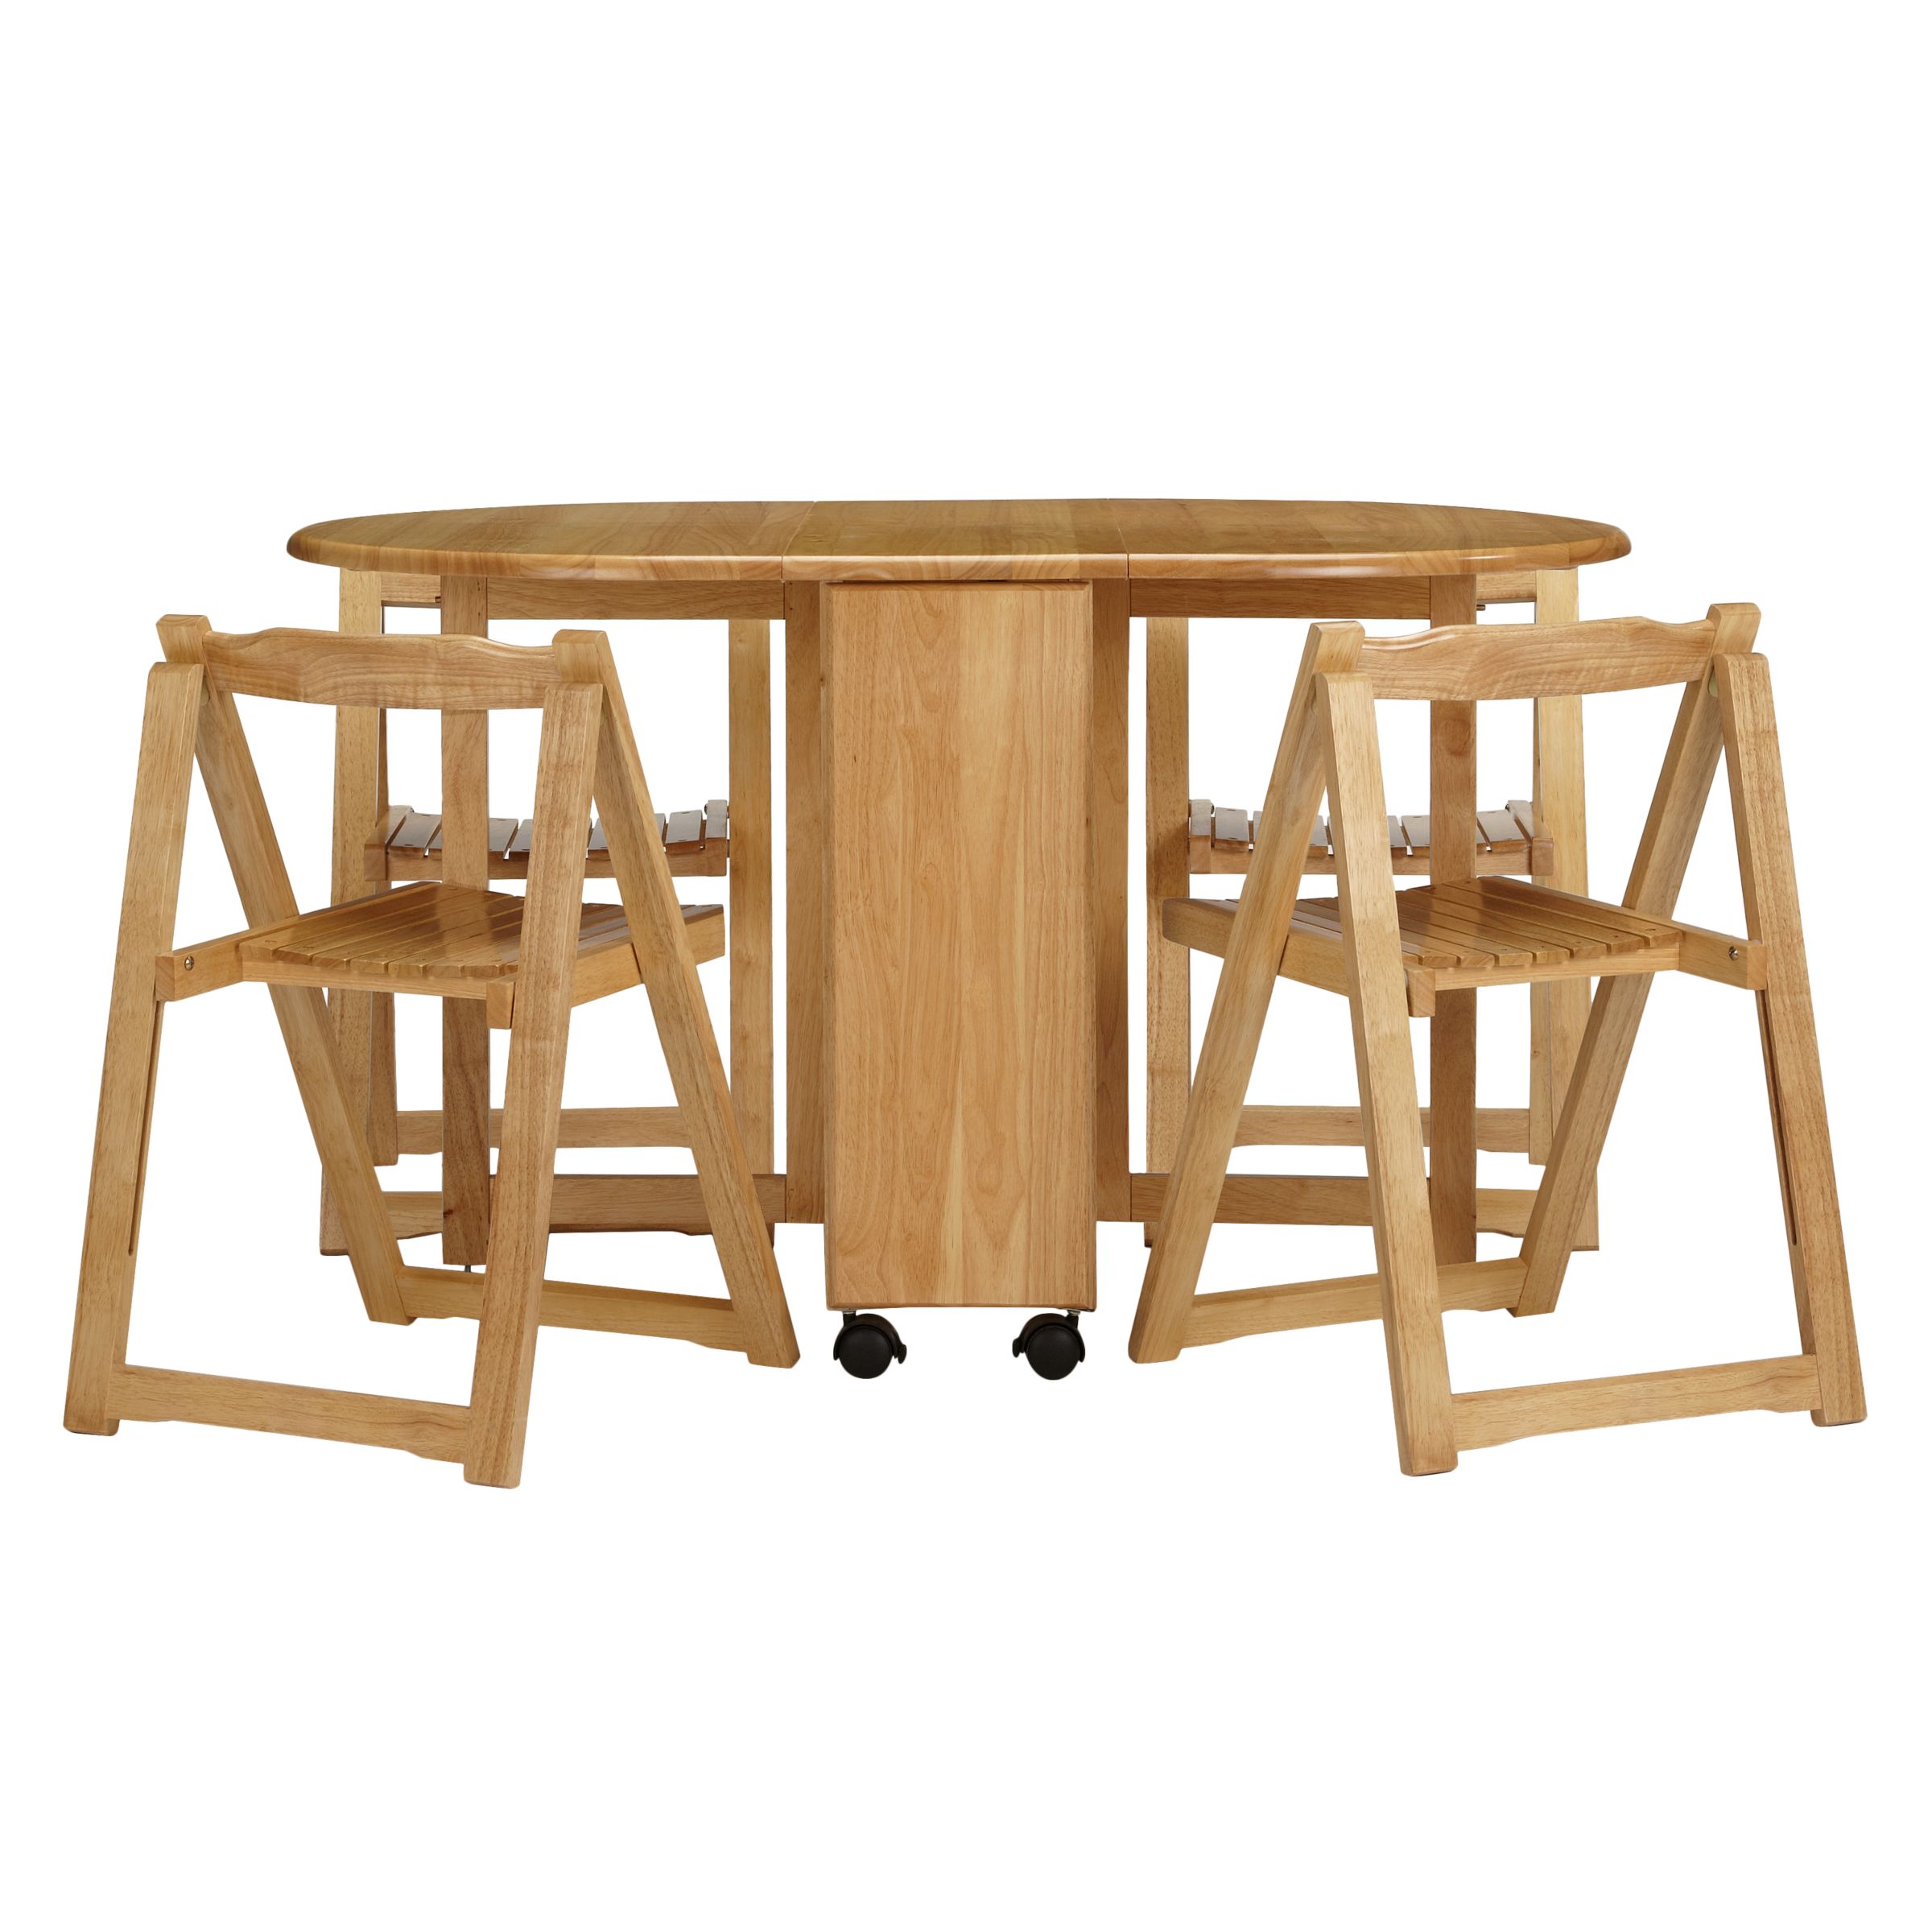 John Lewis Butterfly Drop Leaf Folding Dining Table And Four Chairs At John Lewis Partners